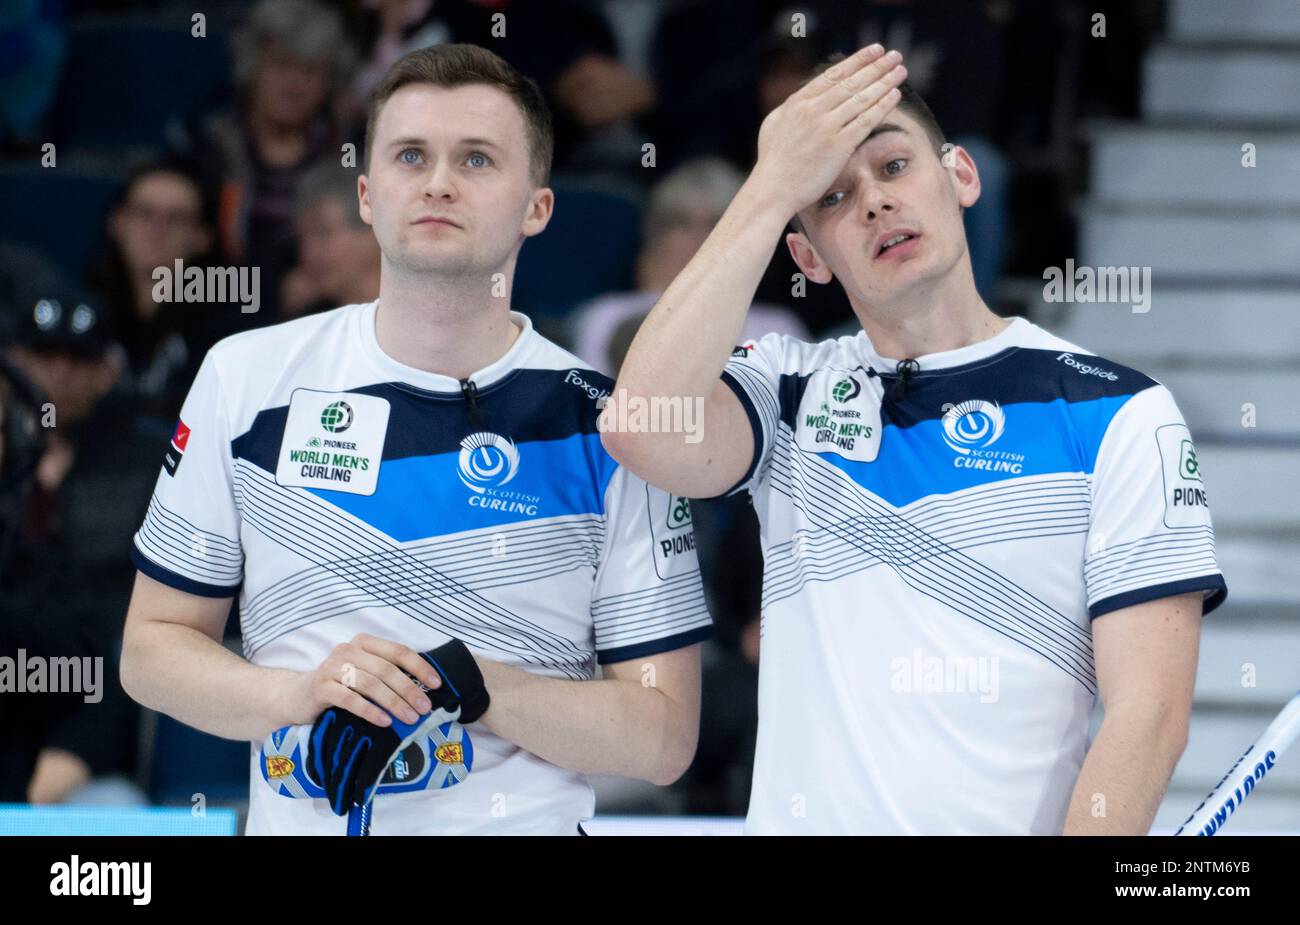 Scotland skip Bruce Mouat, left, directs his teammates against China at the mens world curling championships in Calgary, Alberta, Sunday, April 4, 2021